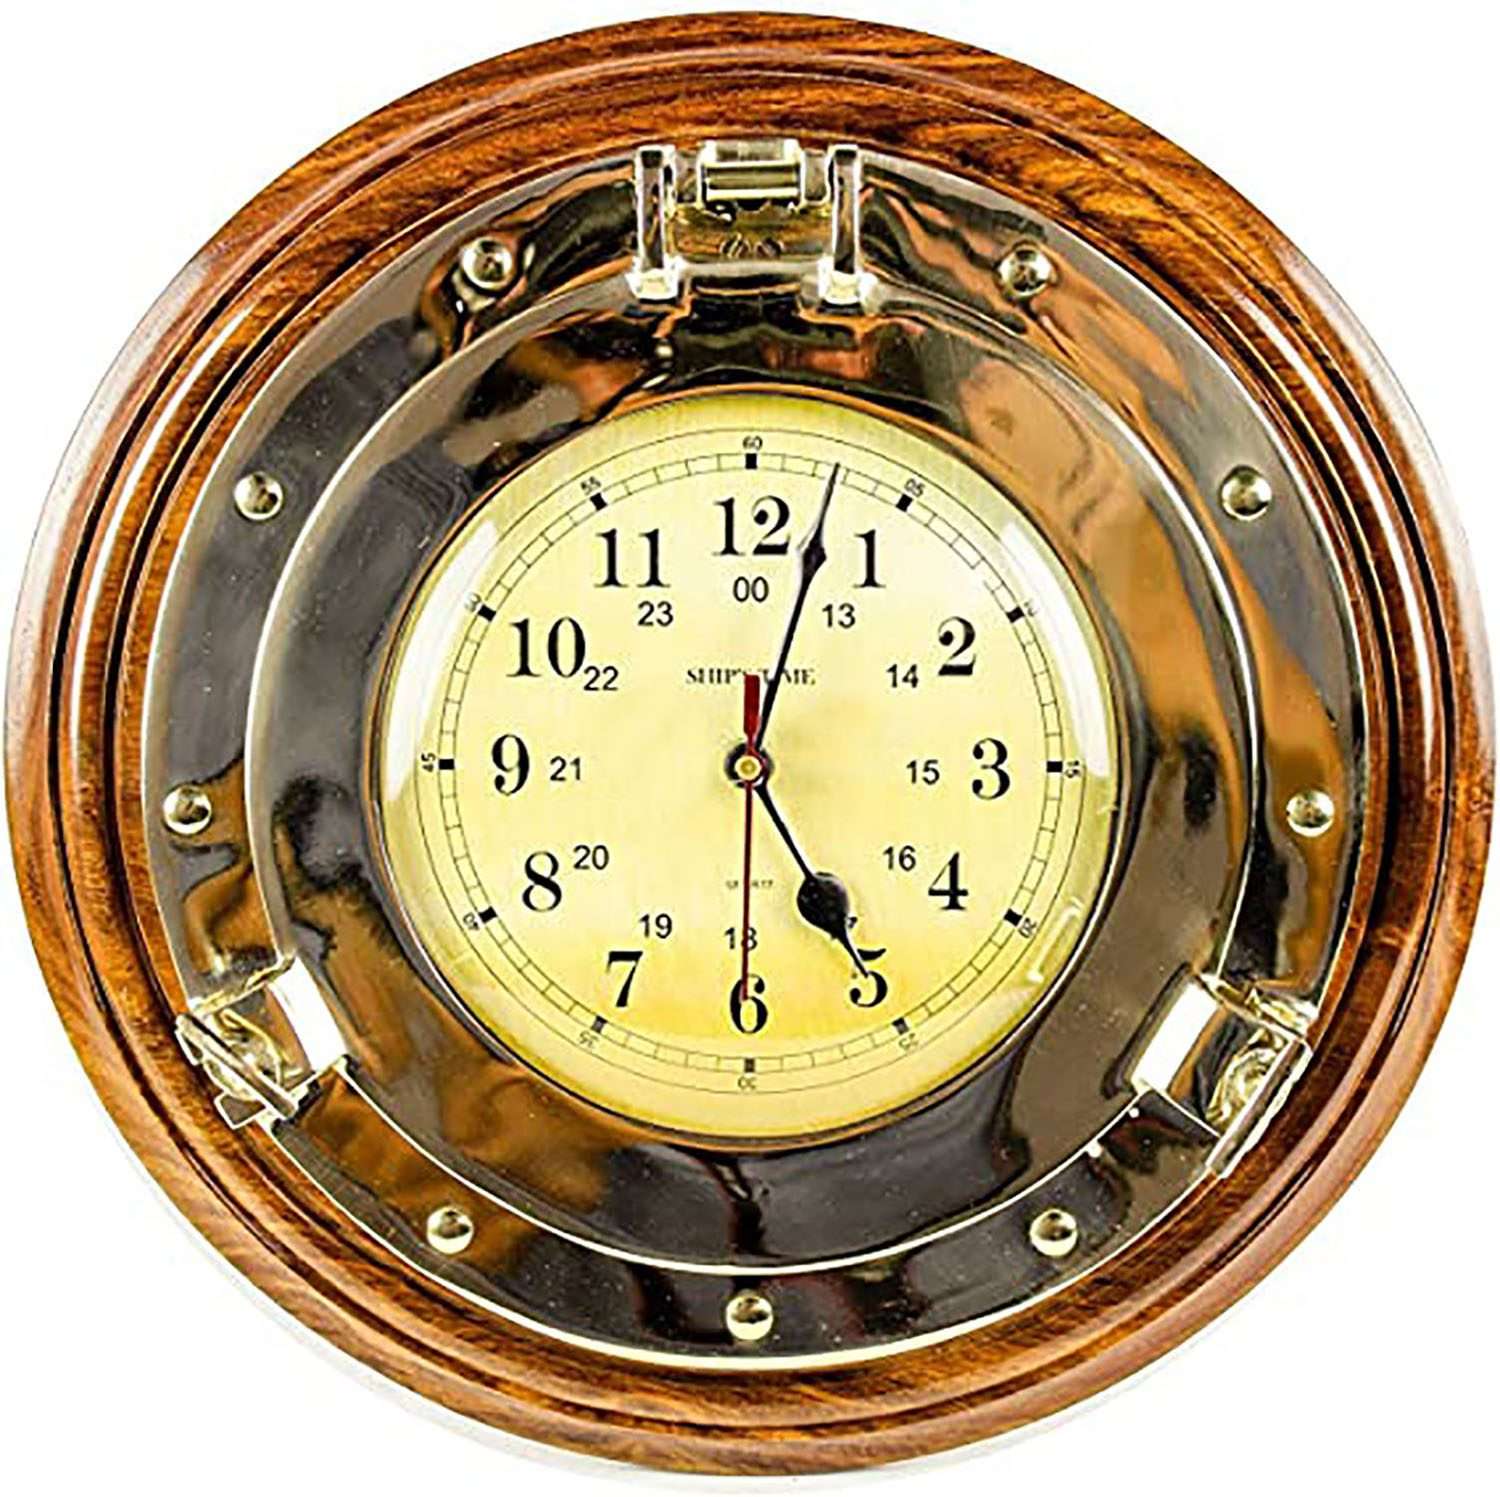 Solid Brass Nautical Wall Clock on Premium Rosewood Base | Unique & Nautical Wall Clock